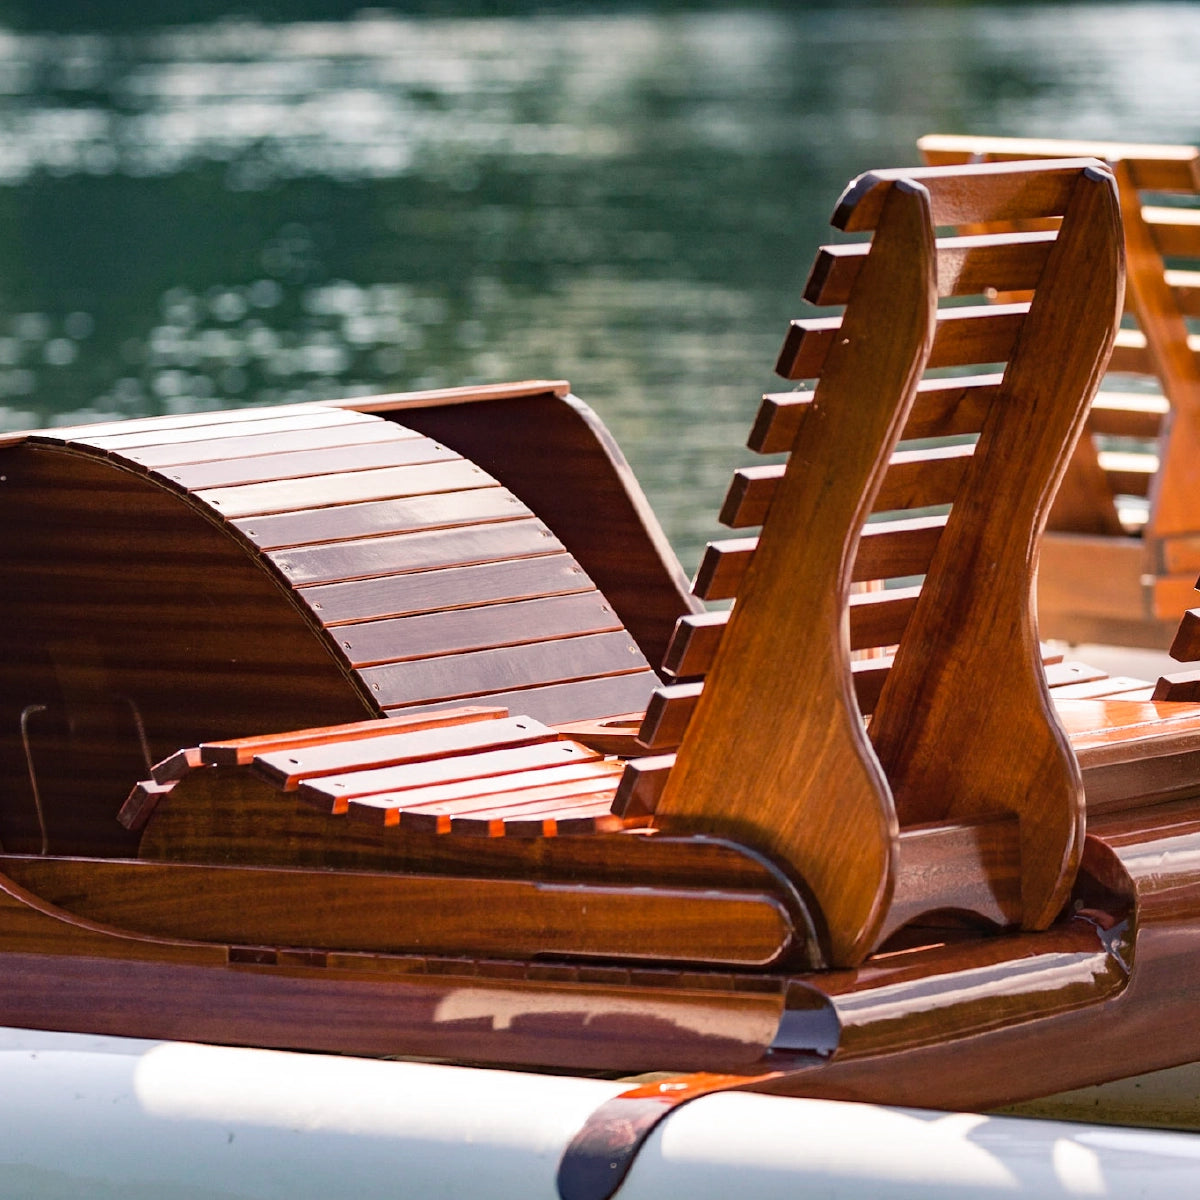 The St. Tropez Pedal Boat